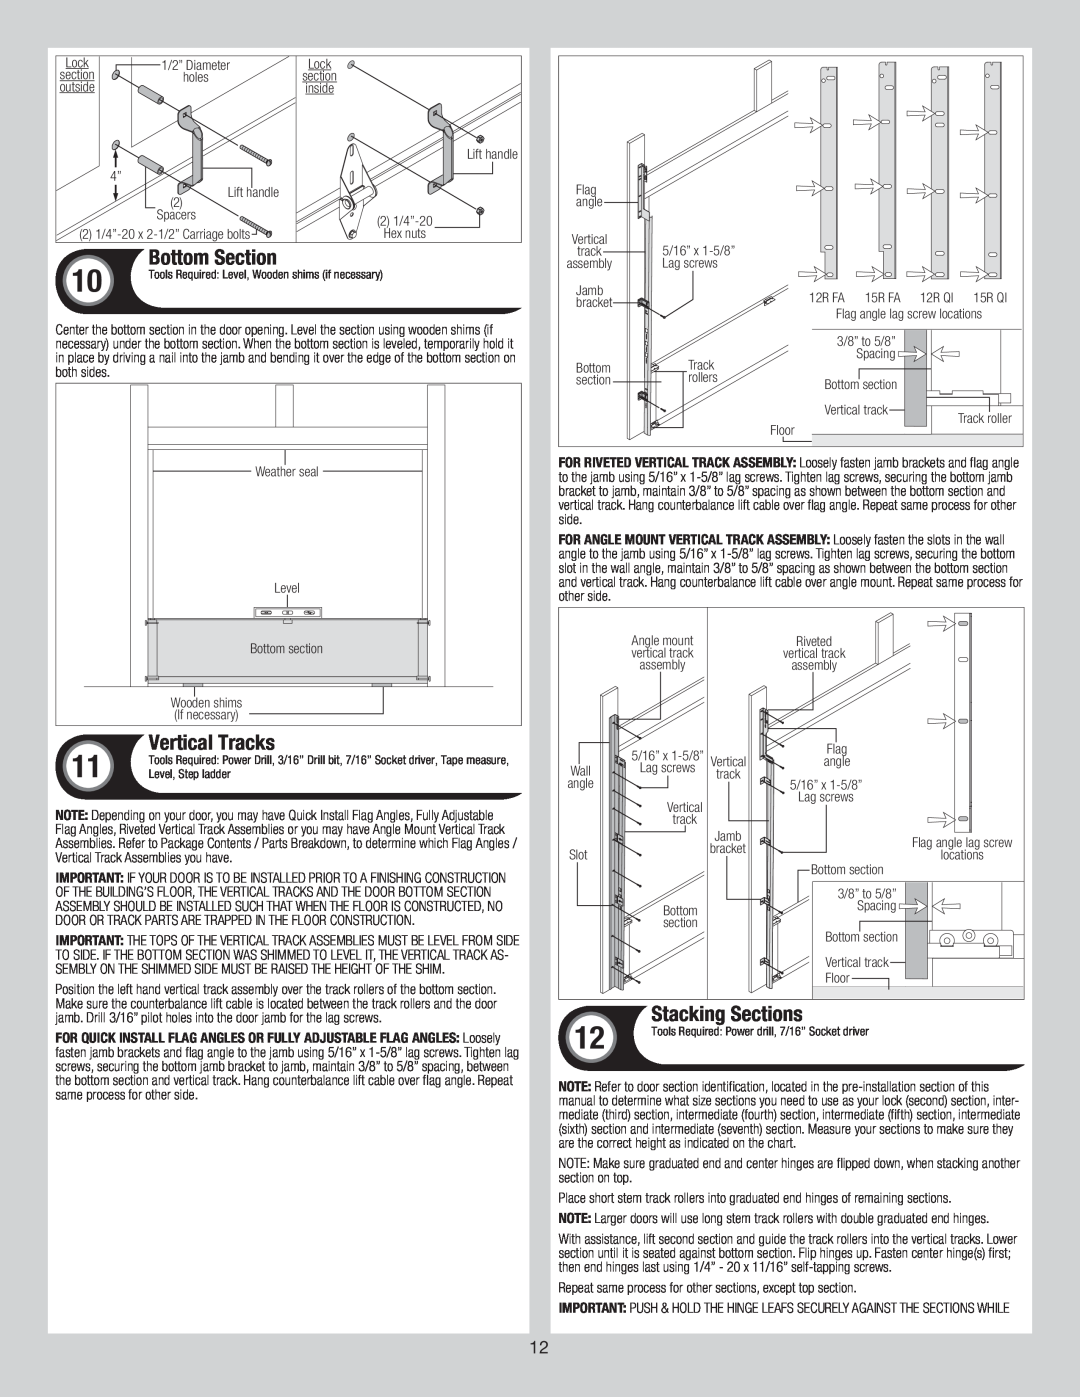 Wayne-Dalton 8300/8500 installation instructions Bottom Section, Vertical Tracks, Stacking Sections 